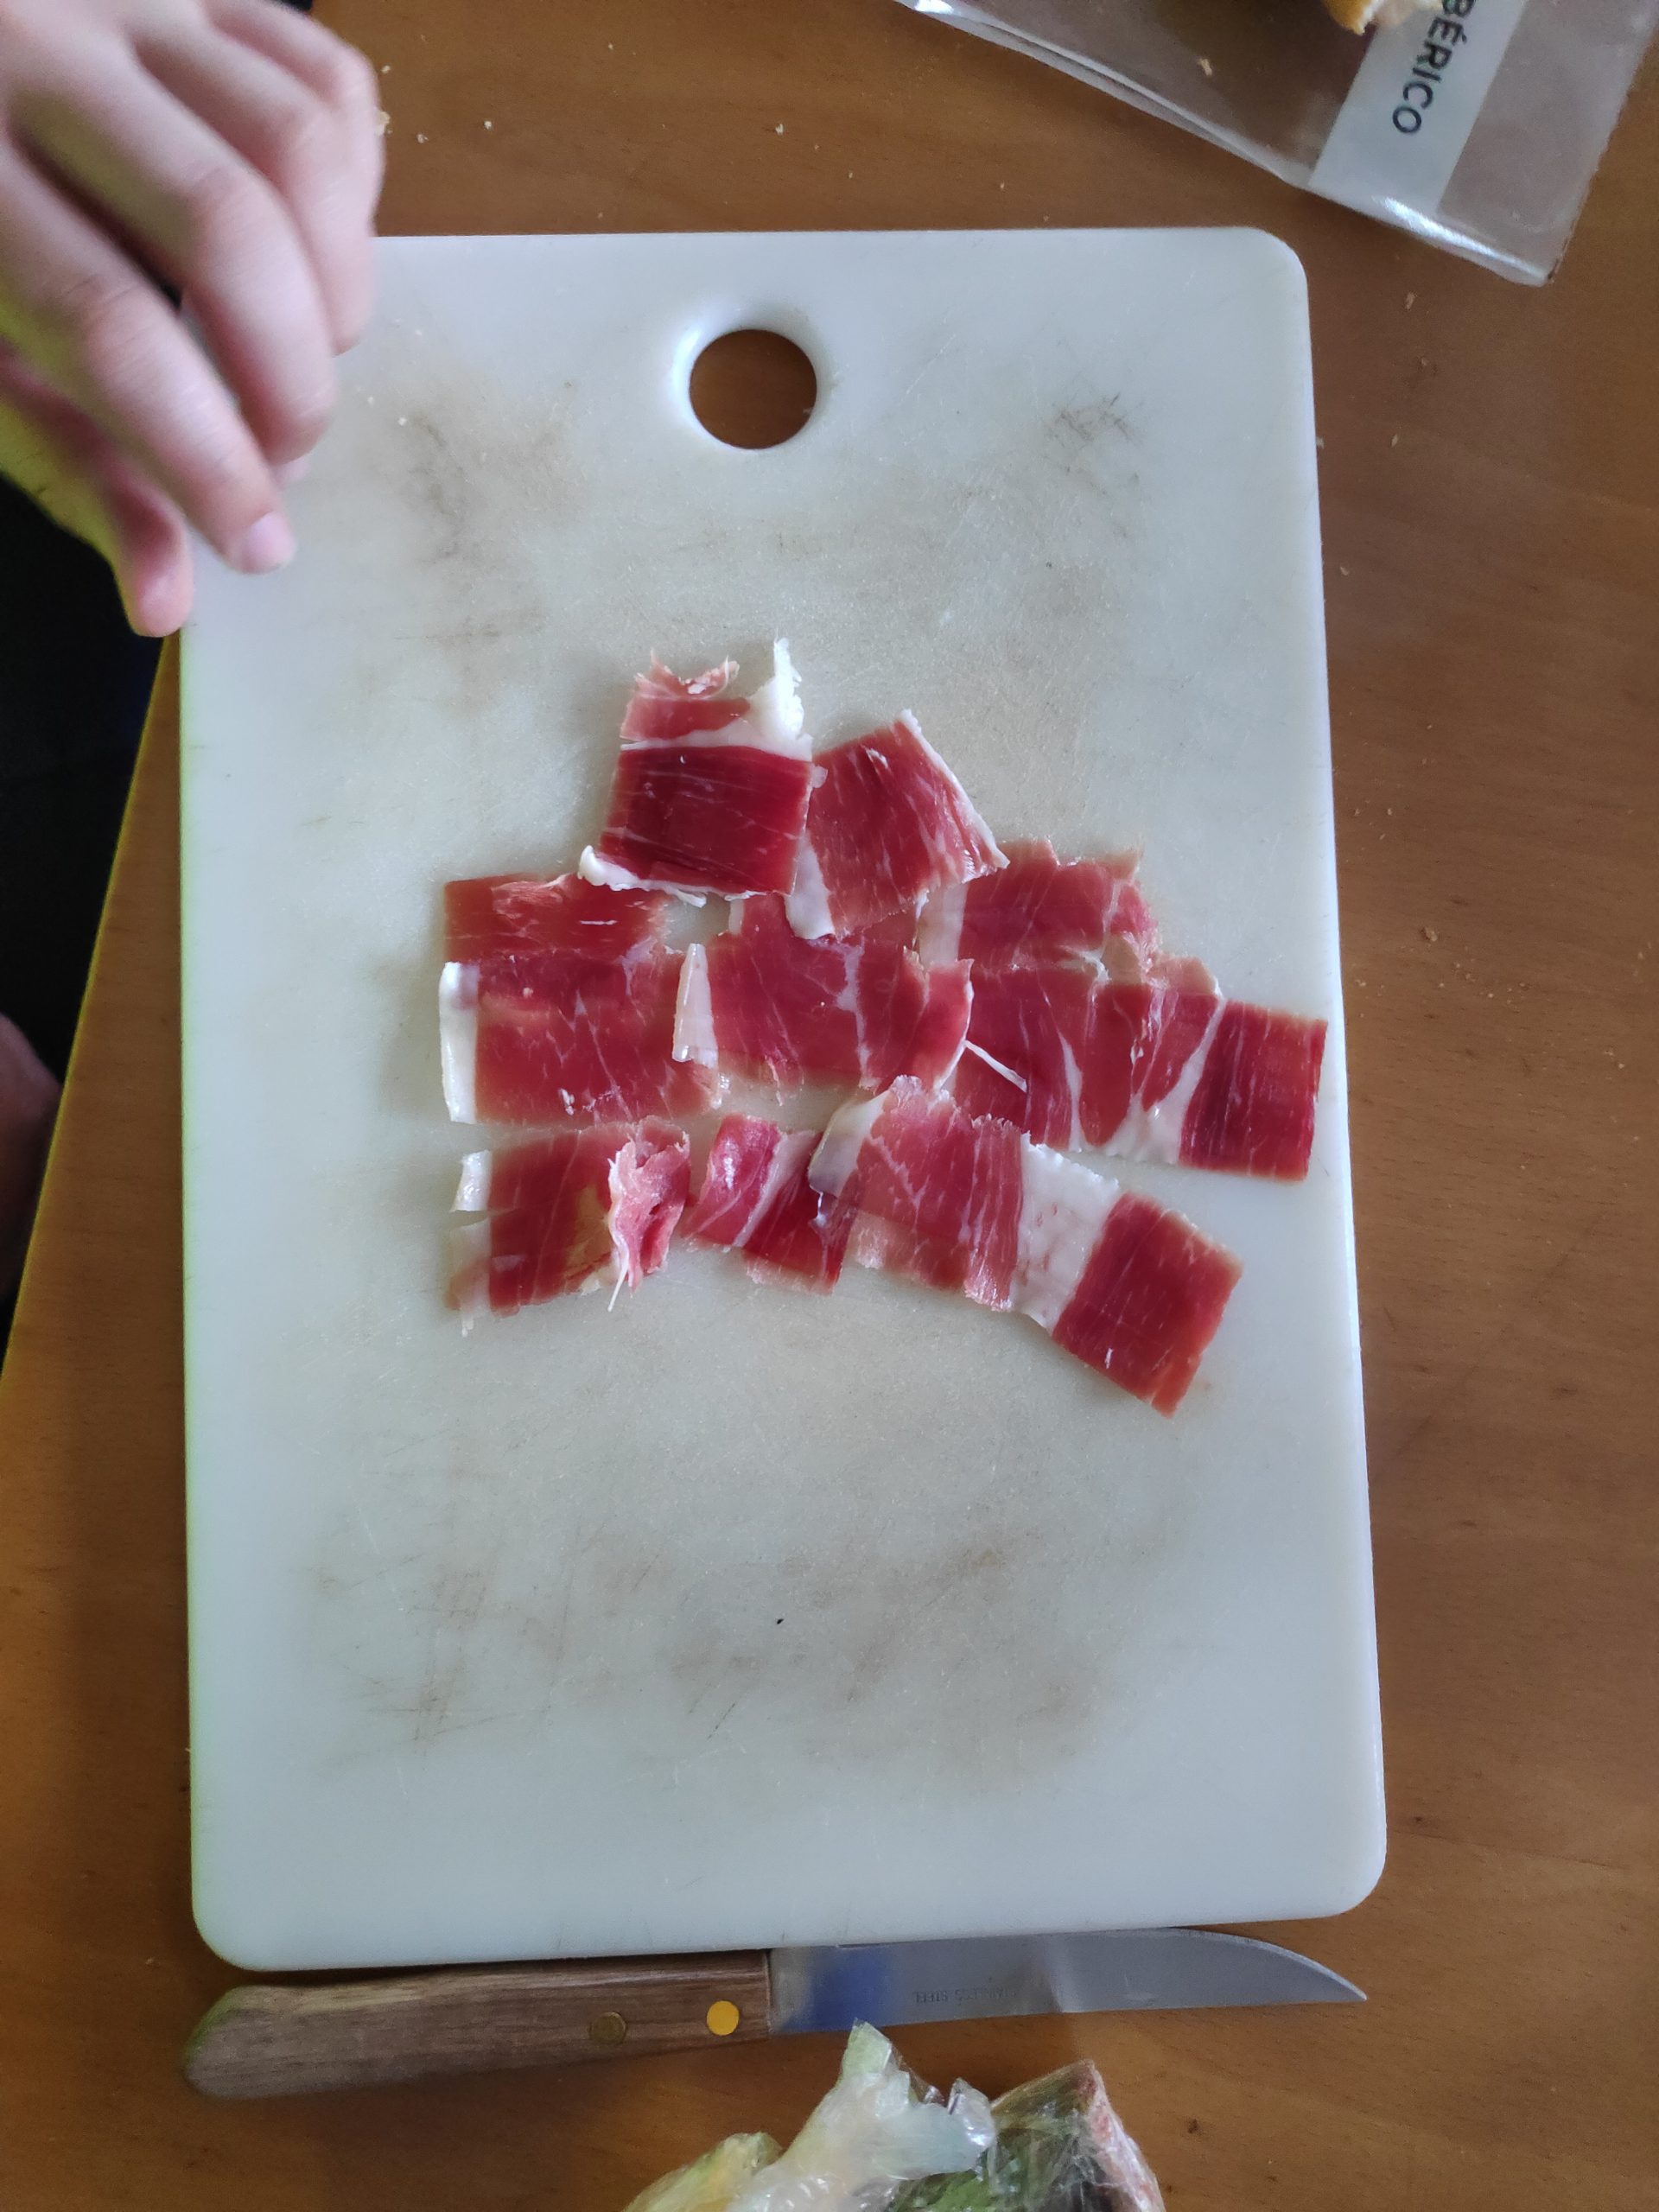 Iberian prosciutto. This thing on the picture costs like 20€.